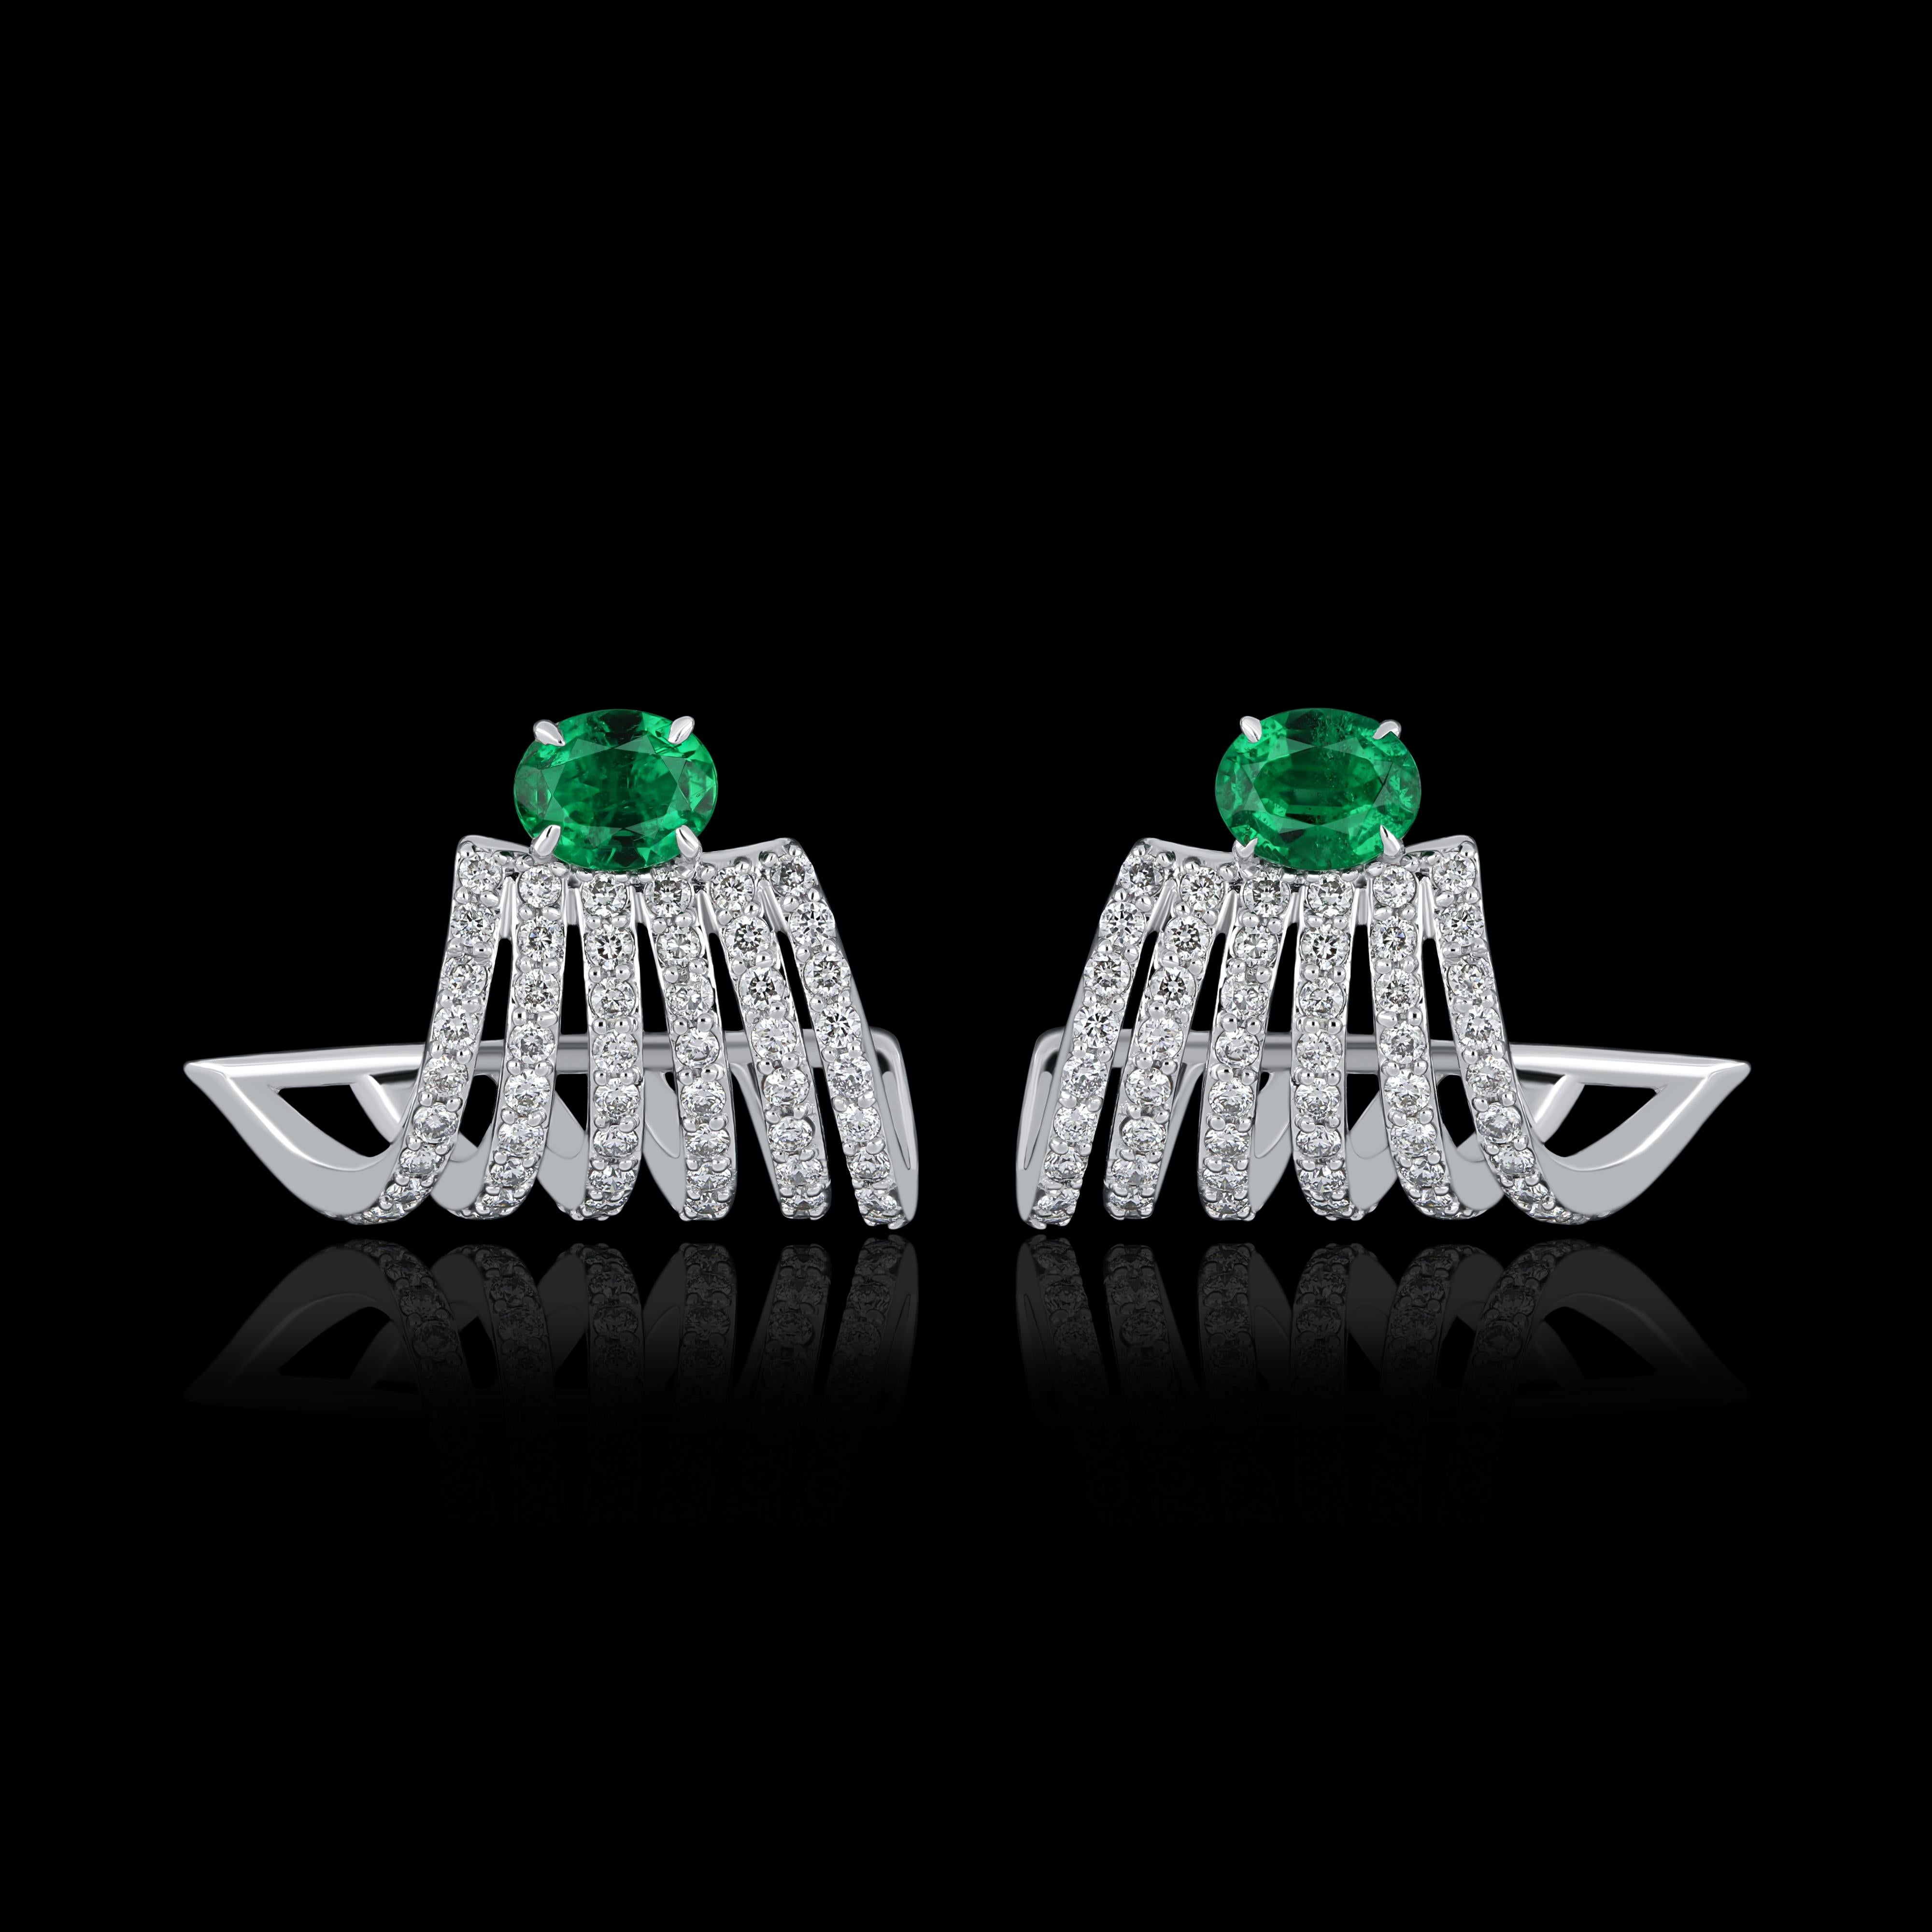 Elegant and exquisitely detailed 18 Karat White Gold Earring, center set with 0.50 Cts .Oval Shape Emerald and micro pave set Diamonds, weighing approx. 0.69 Cts Beautifully Hand crafted in 18 Karat White Gold.

Stone Detail:
Emerald: 5x4MM

Stone